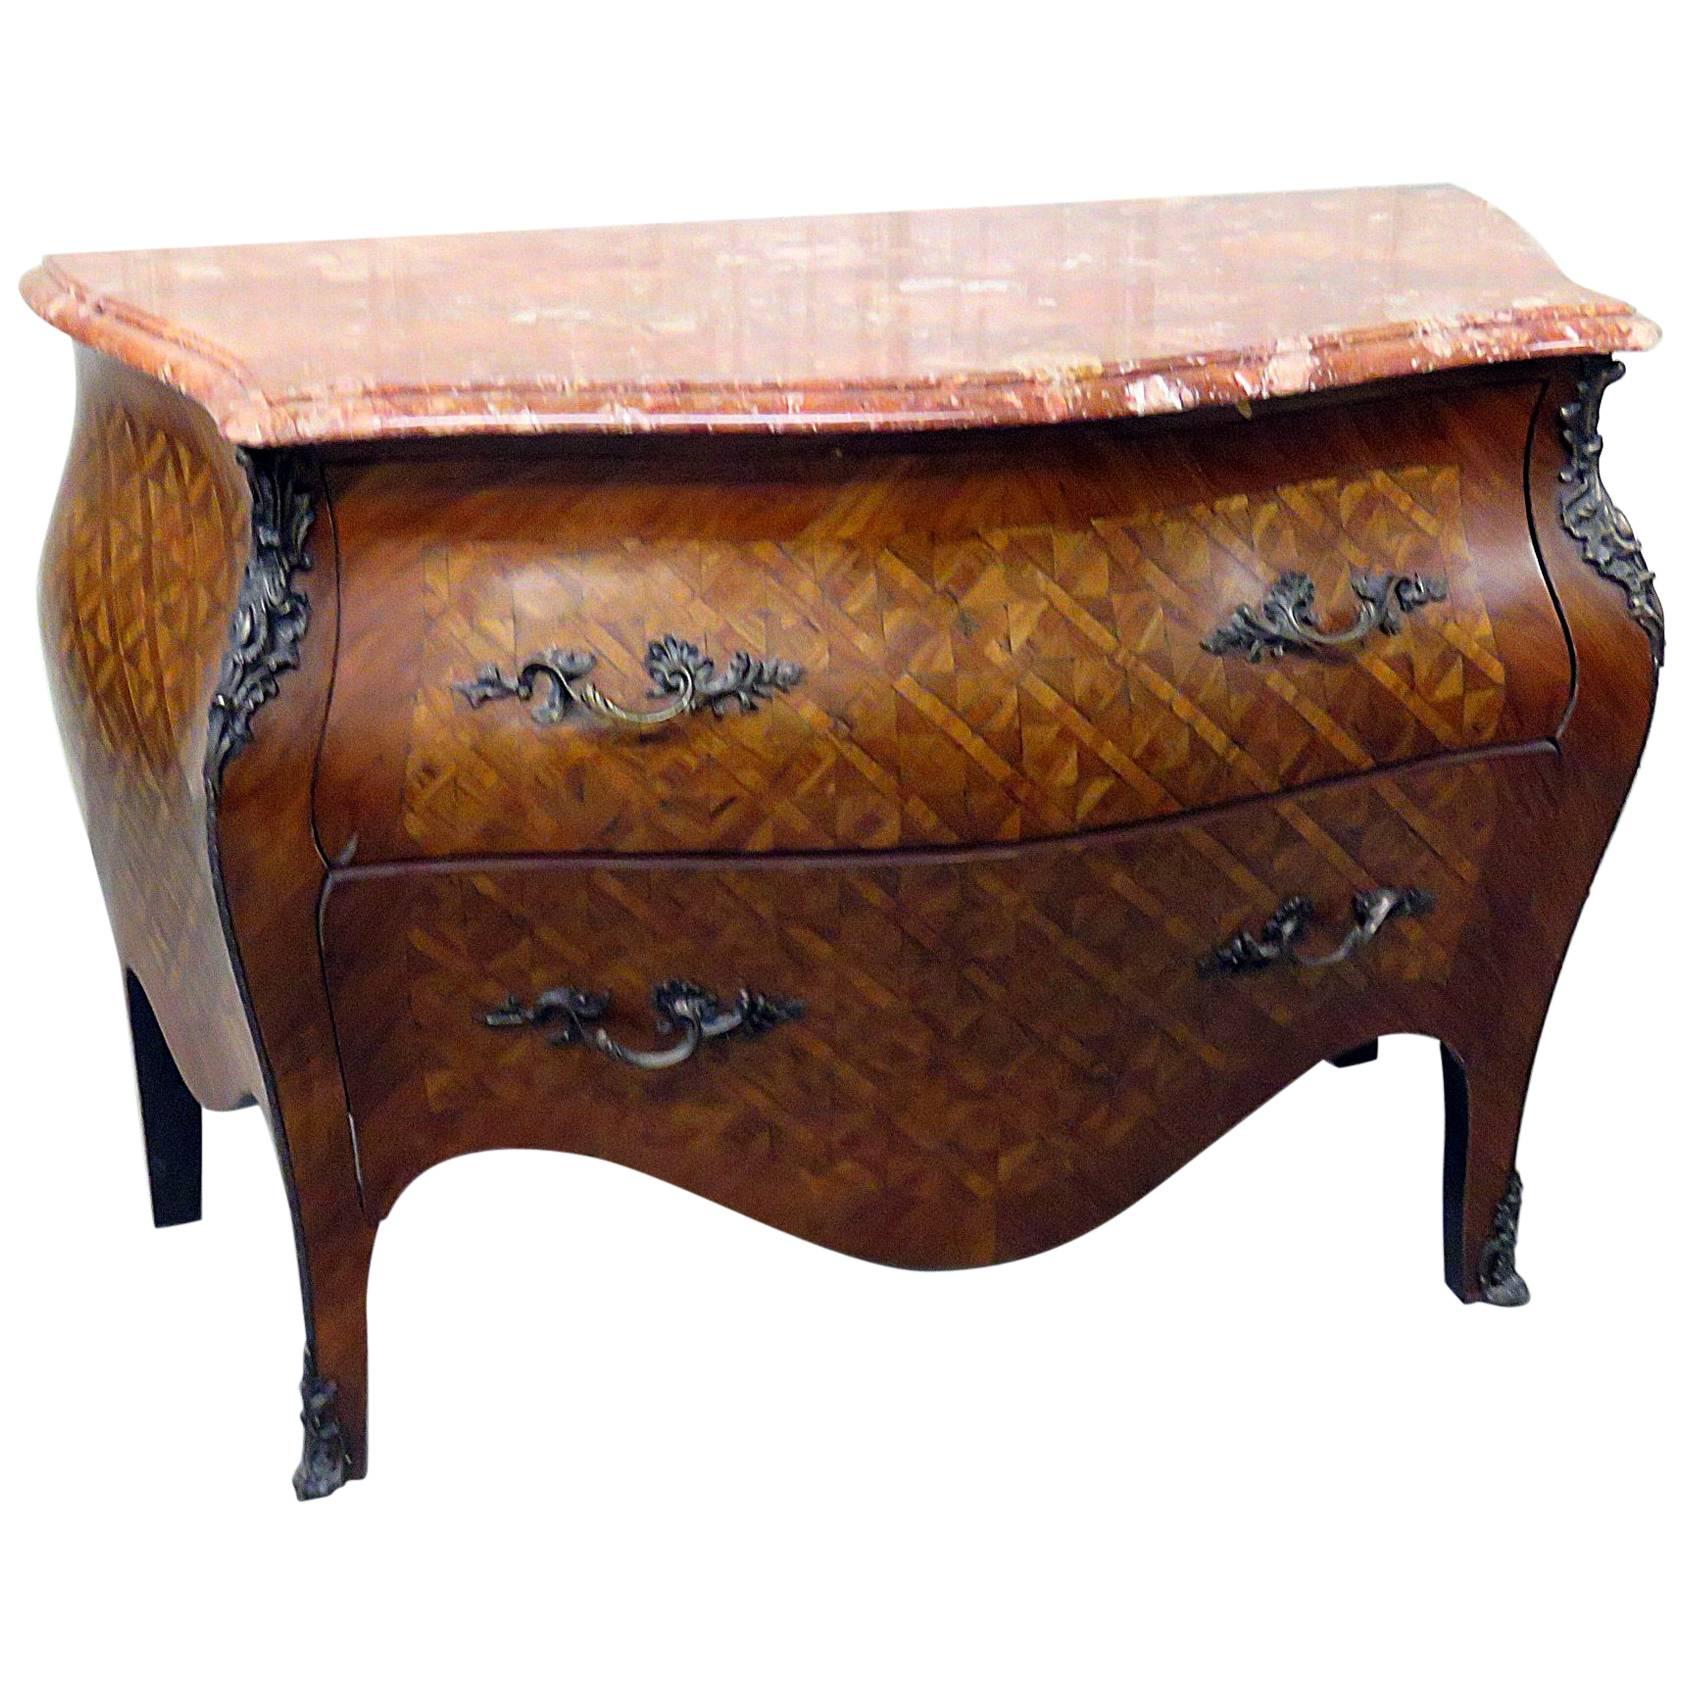 Inlaid Kingwood French Louis XV Style Marble Top Marquetry Commode Dresser For Sale